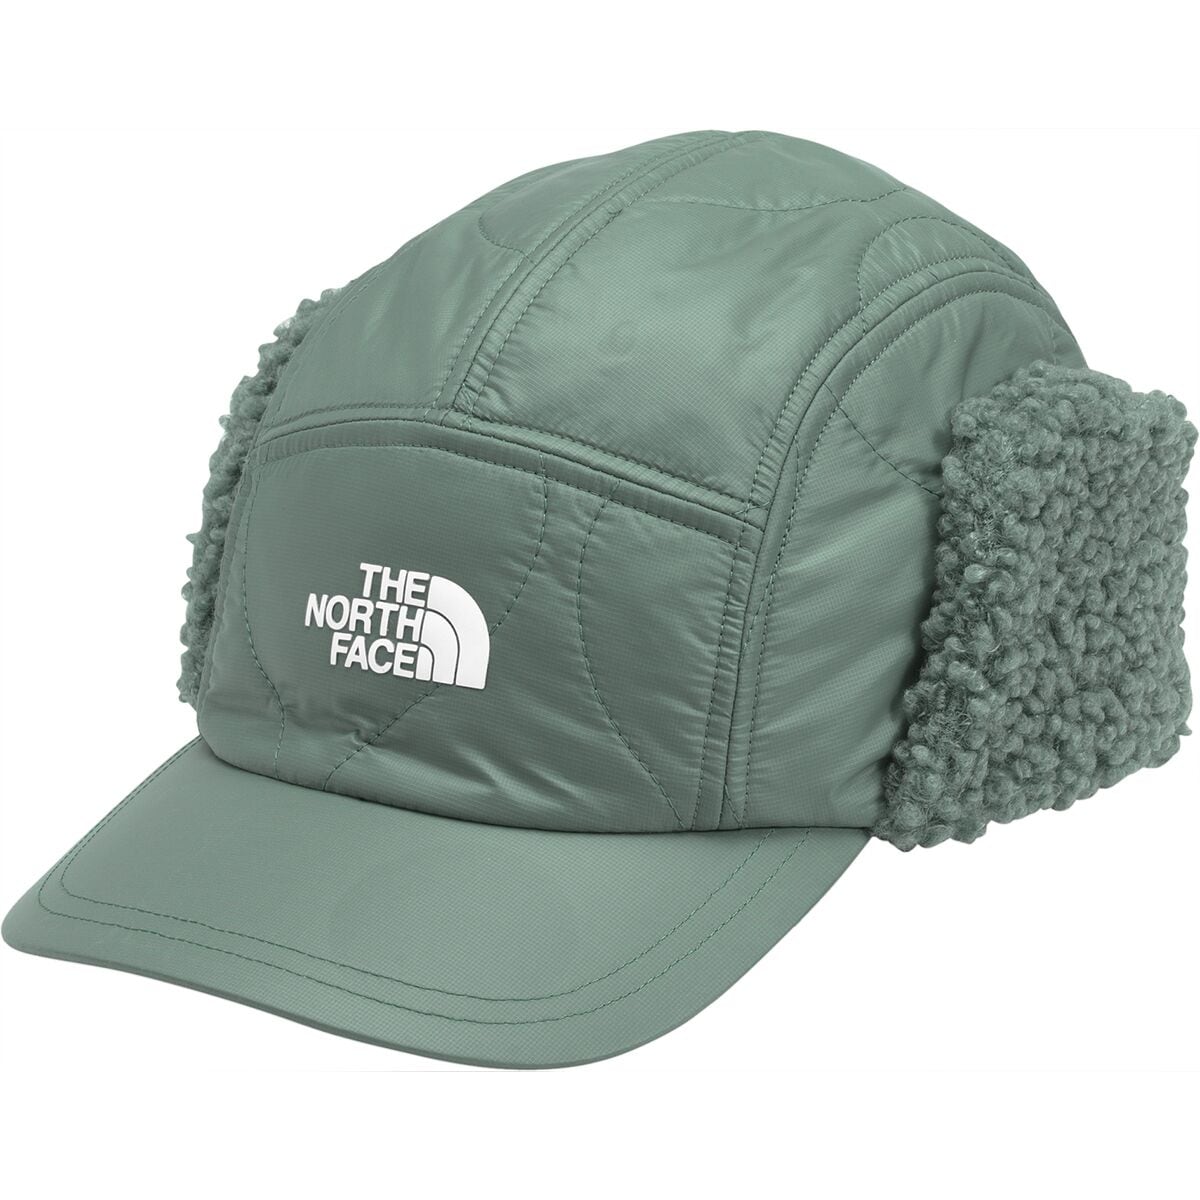 The North Face Insulated Earflap Ball Cap - Men